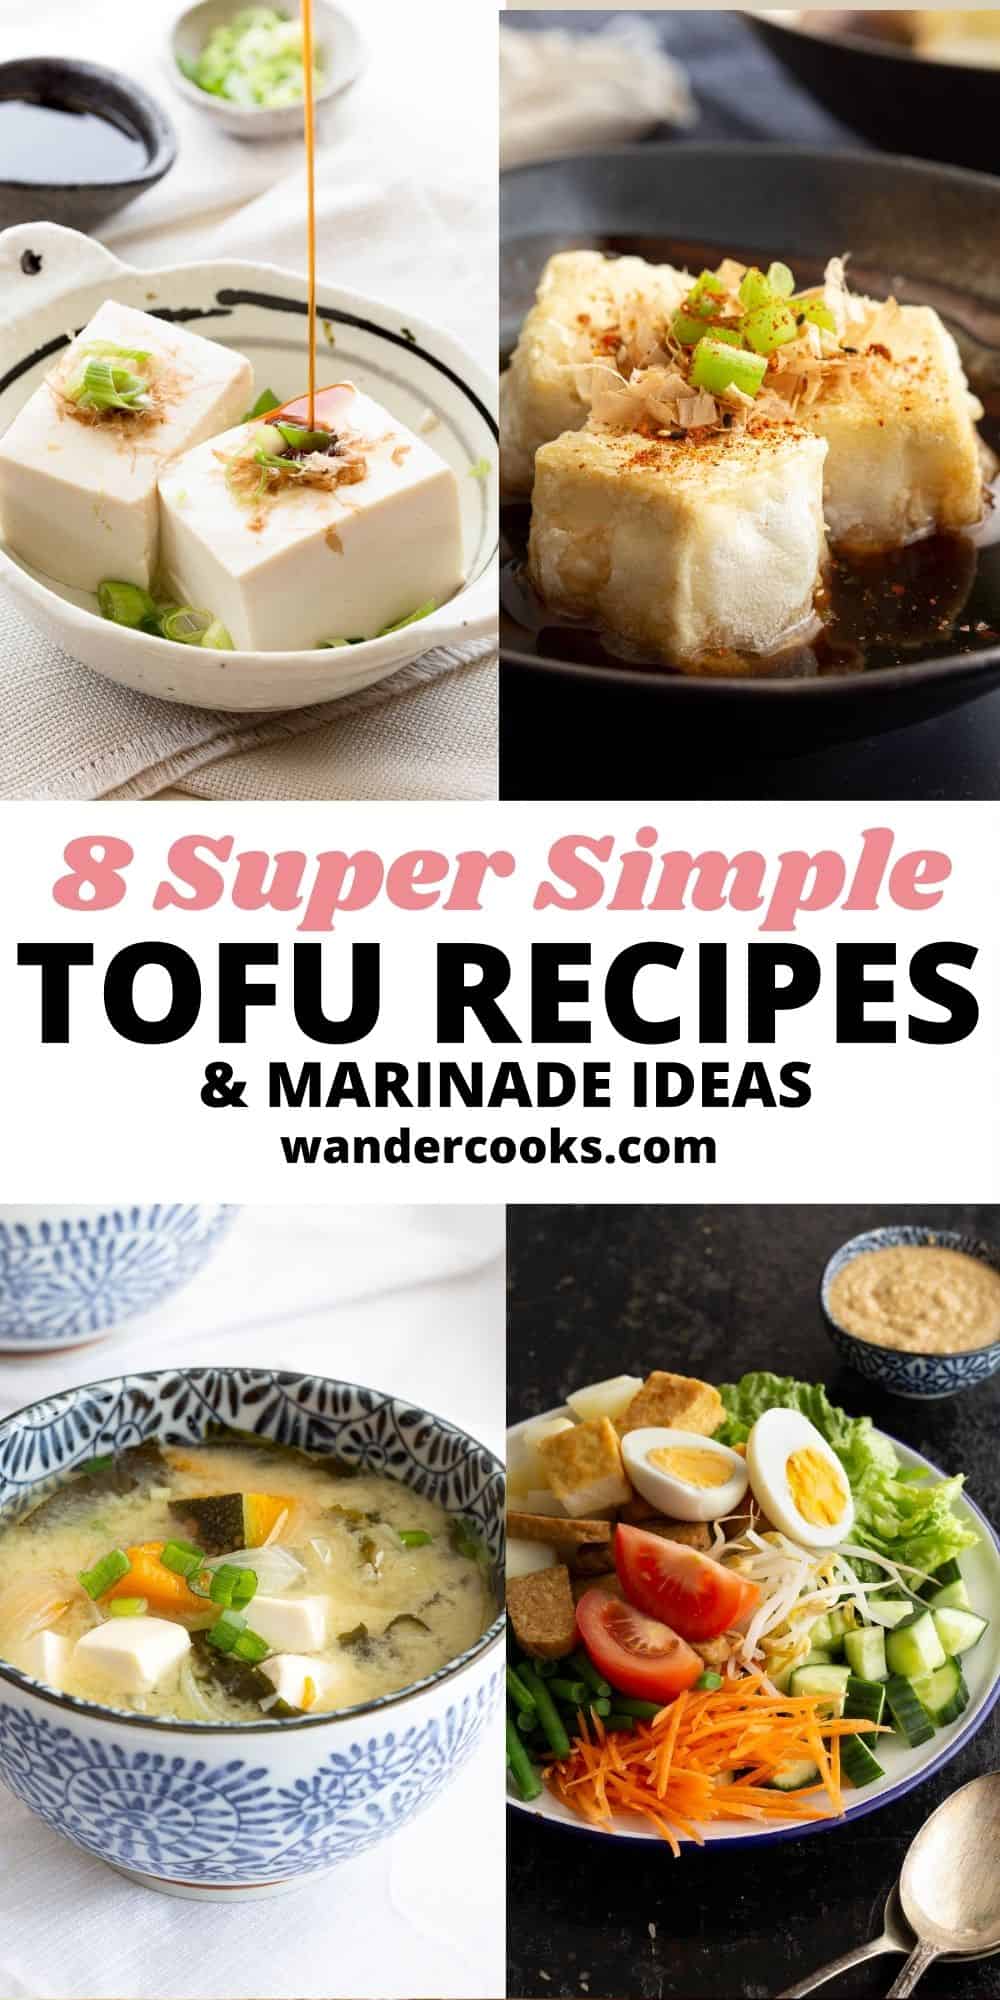 8 Simple Tofu Recipes and Marinade Ideas to Transform Your Weeknight Dinners